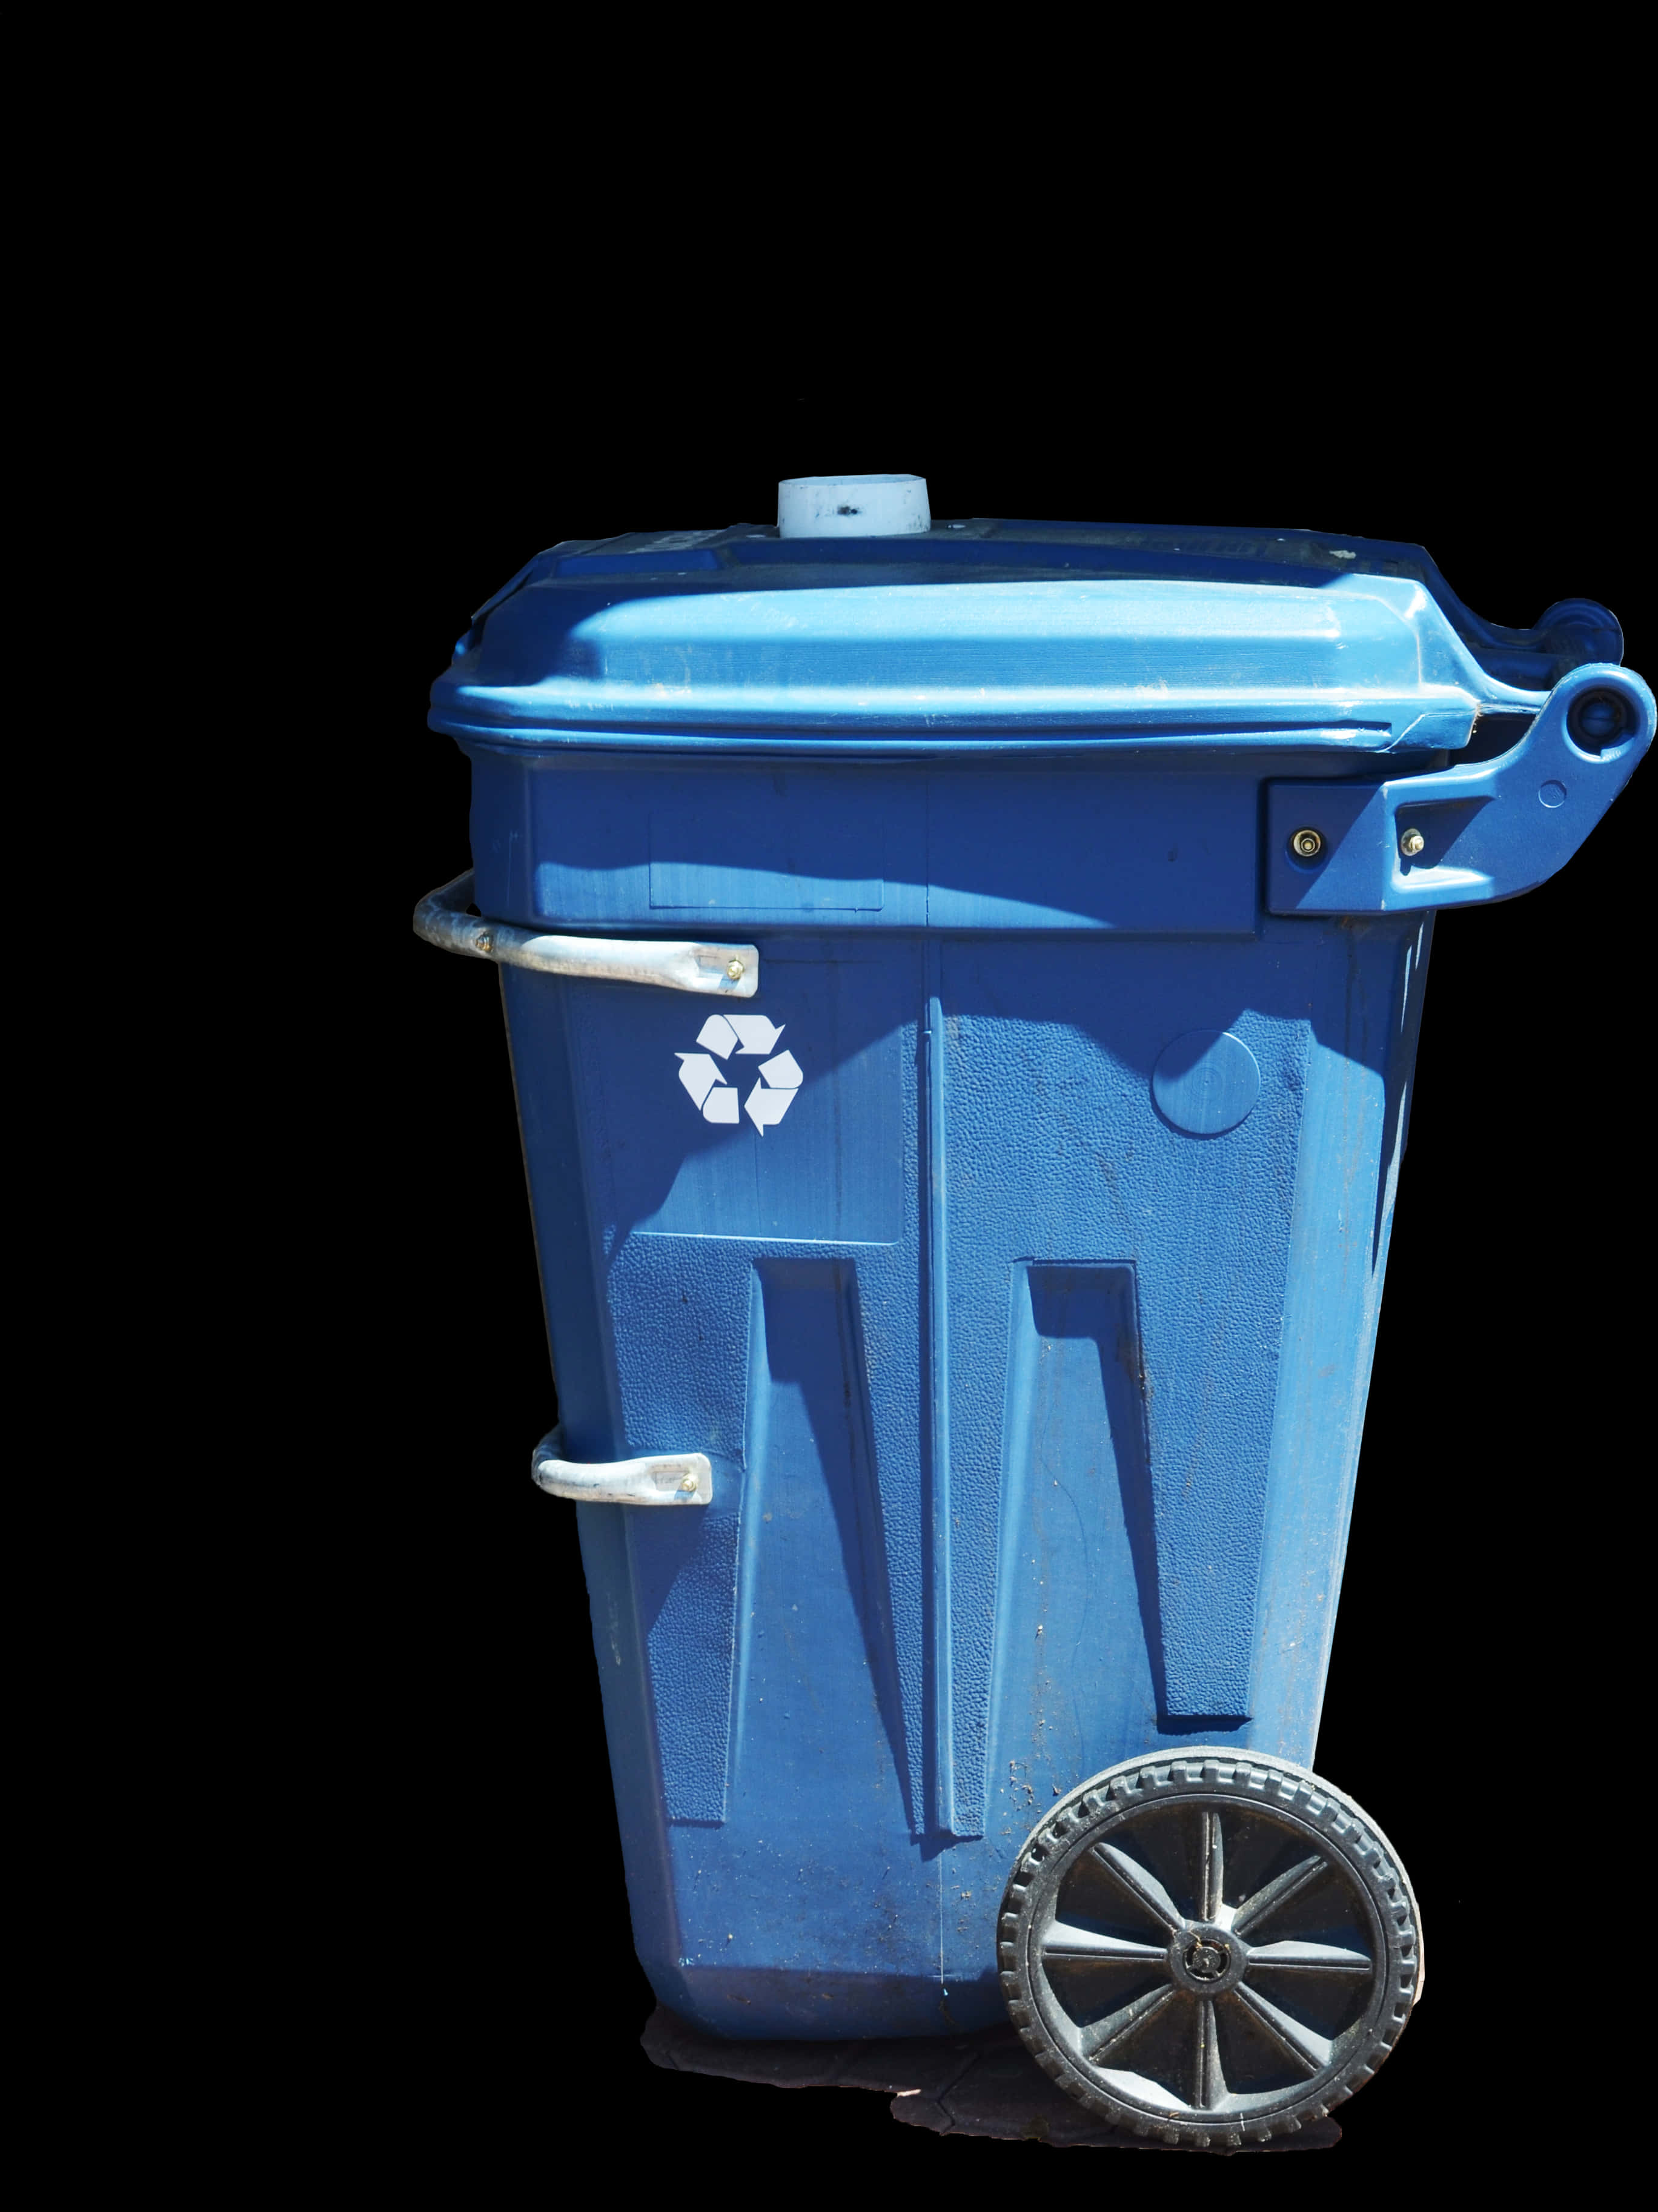 A Blue Trash Can With A Black Background